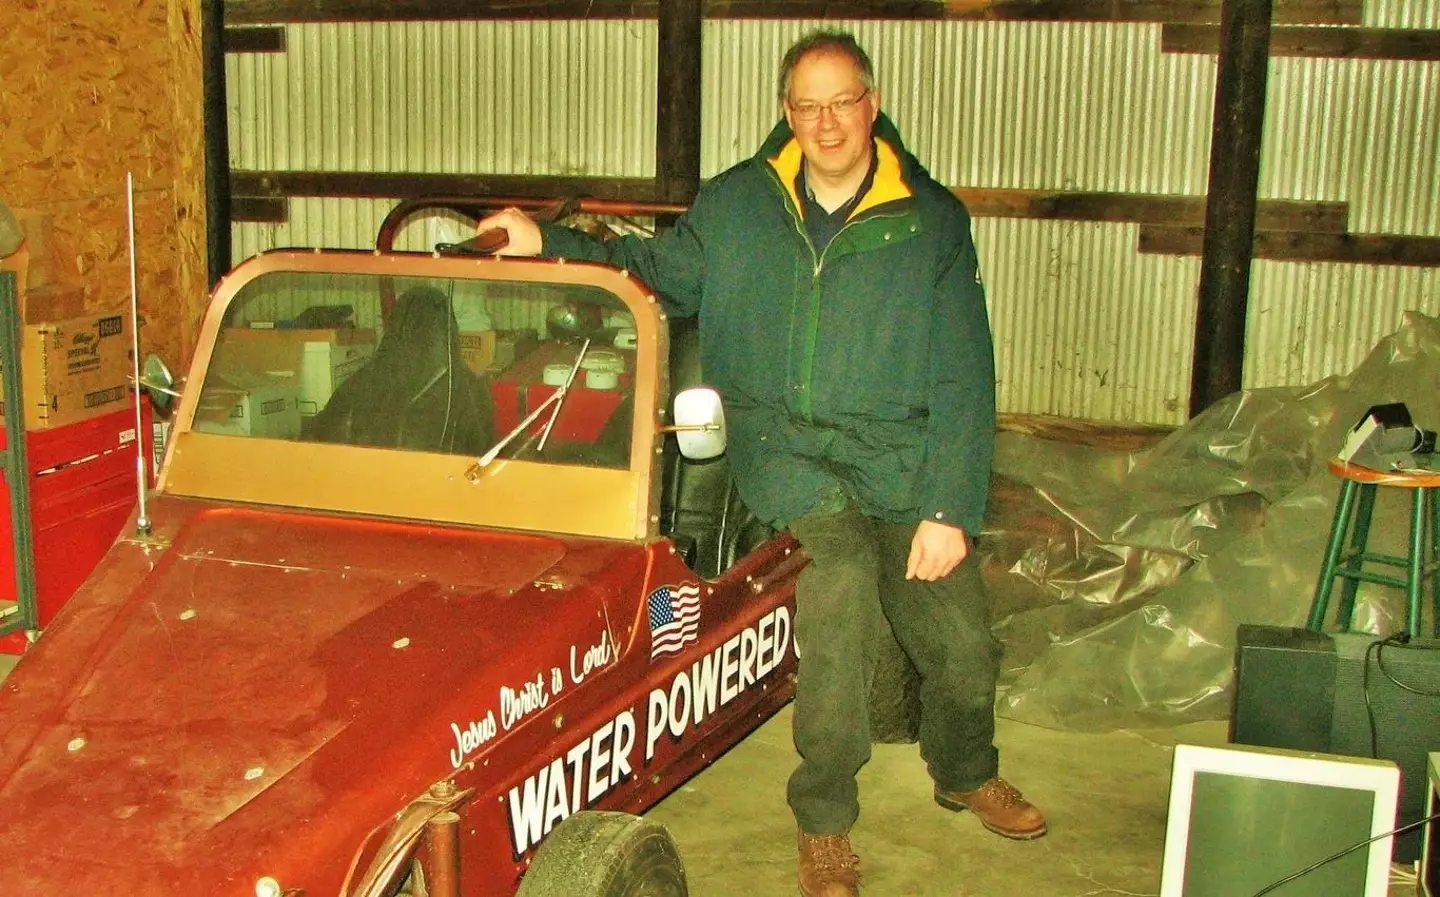 Meyer with the 'water-powered' car.